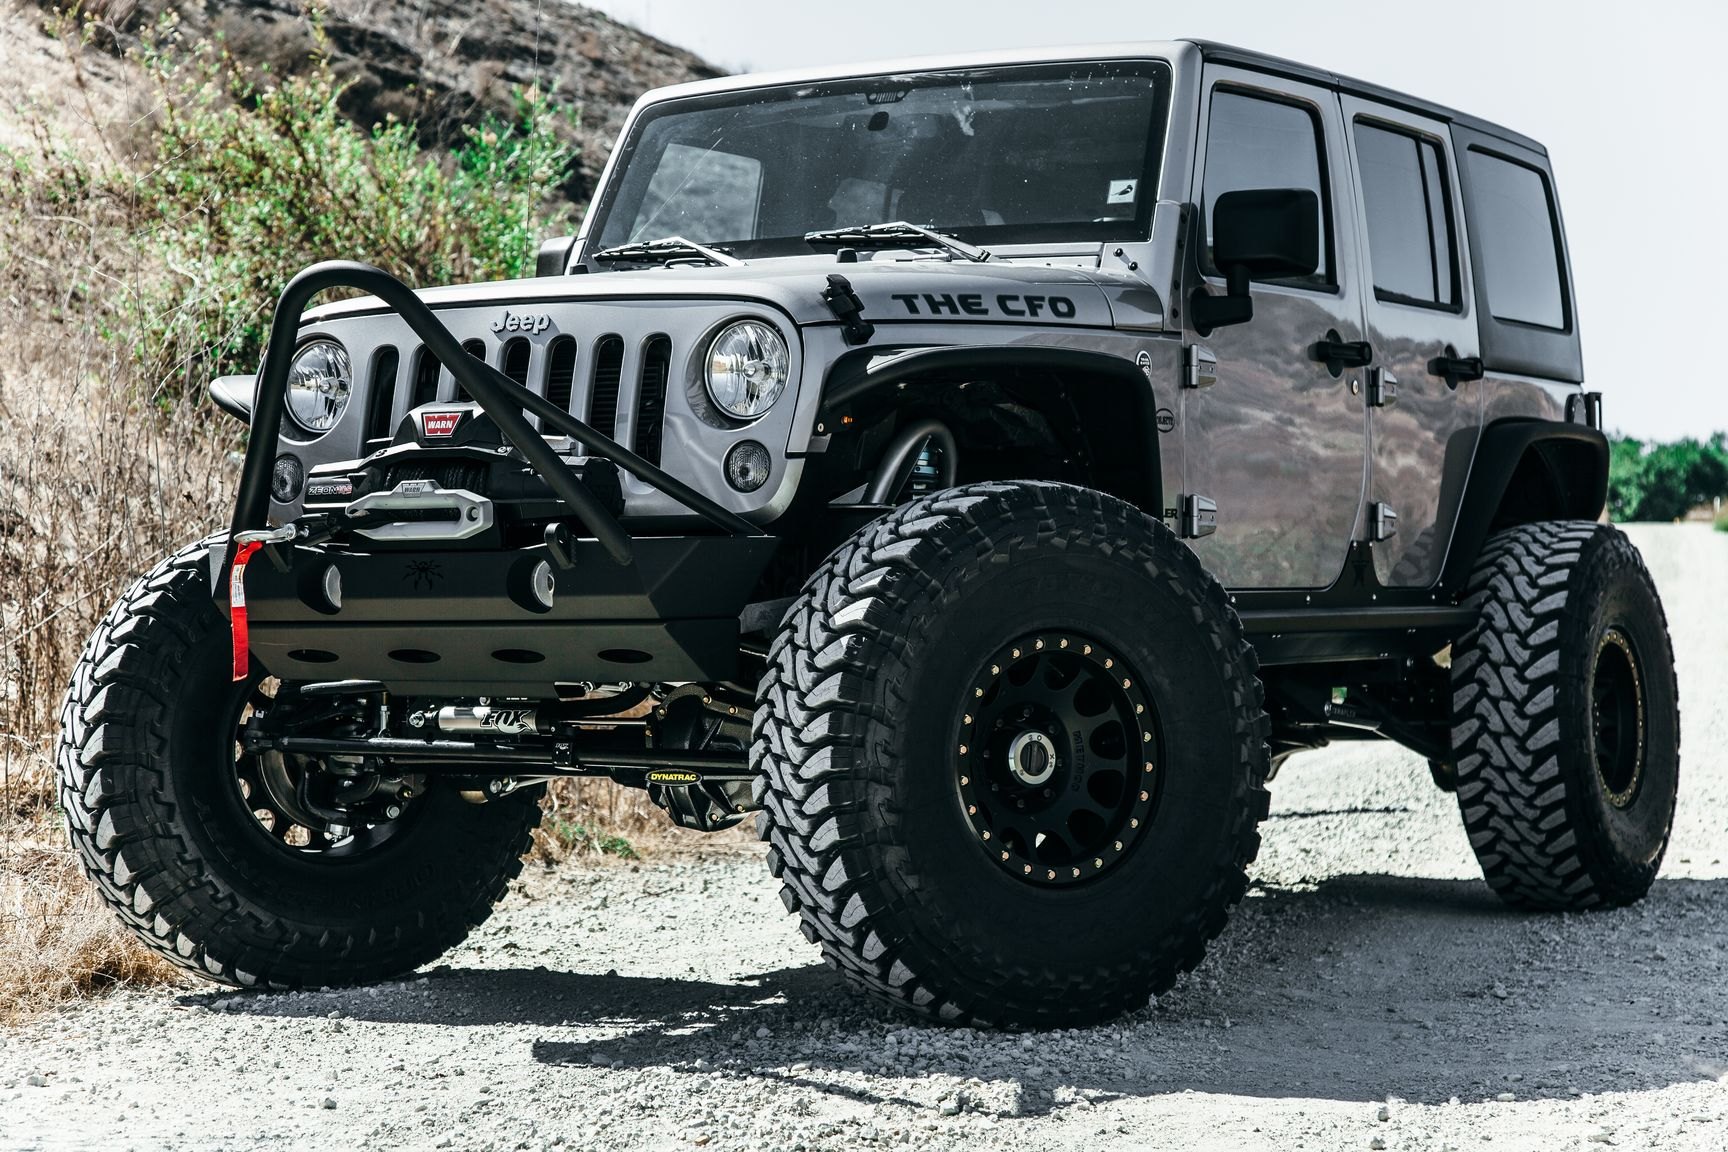 Gray Lifted Jeep Wrangler with Warn Zeon Winch - Photo by Rebel Off-Road